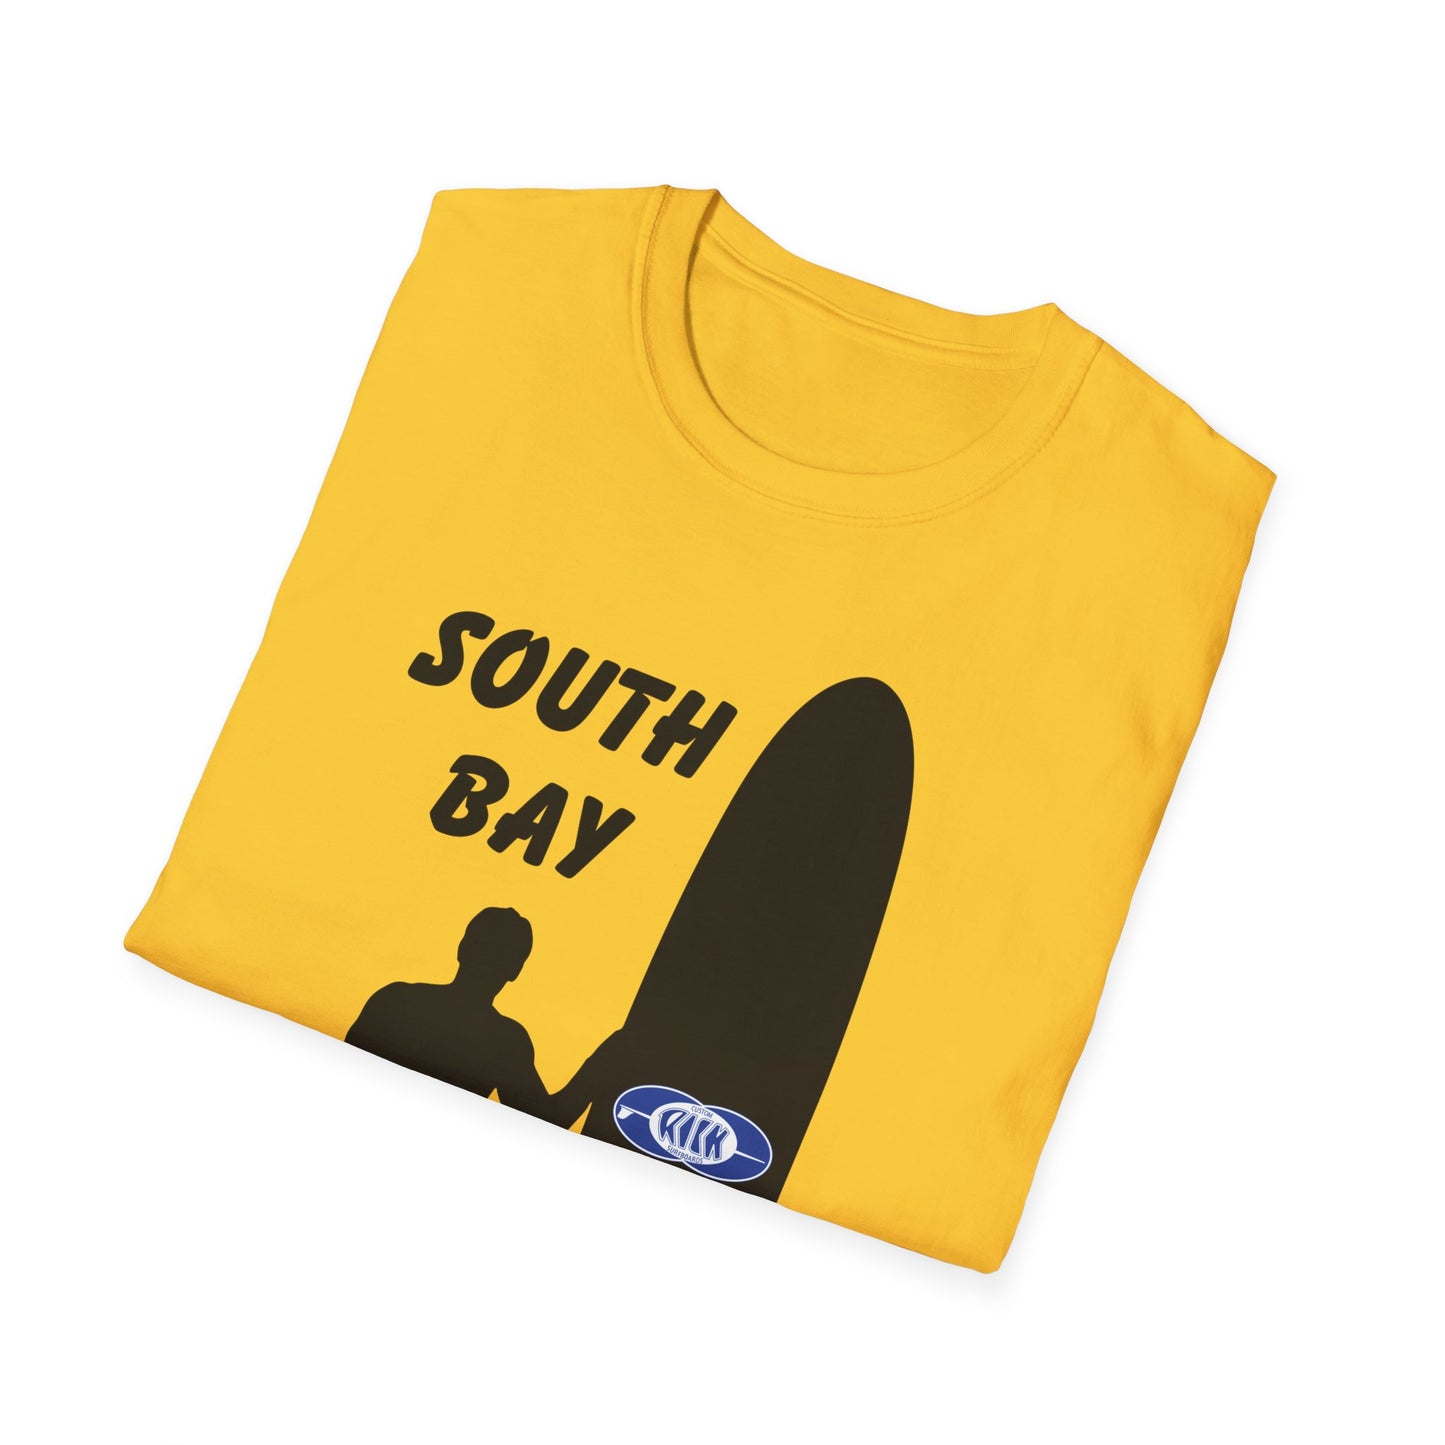 South Bay Rick SurfBoards Unisex Softstyle T-Shirt